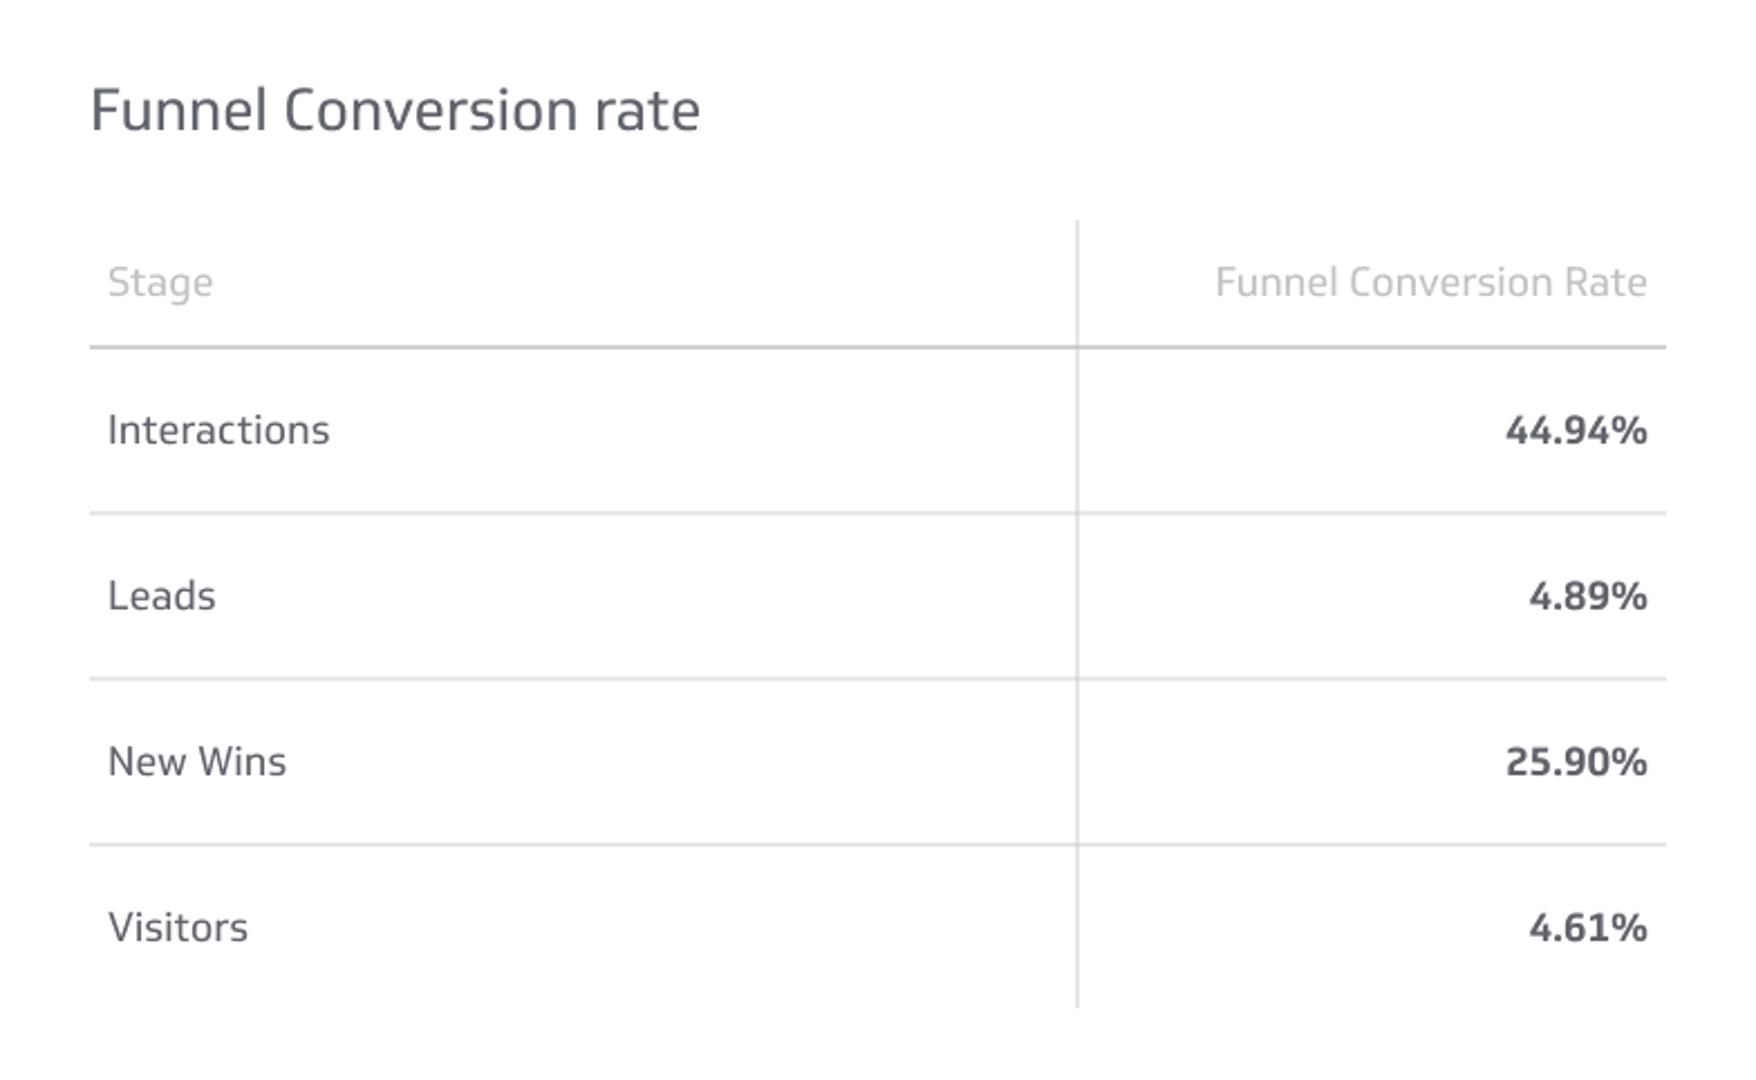 Related KPI Examples - Funnel Conversion Rate Metric